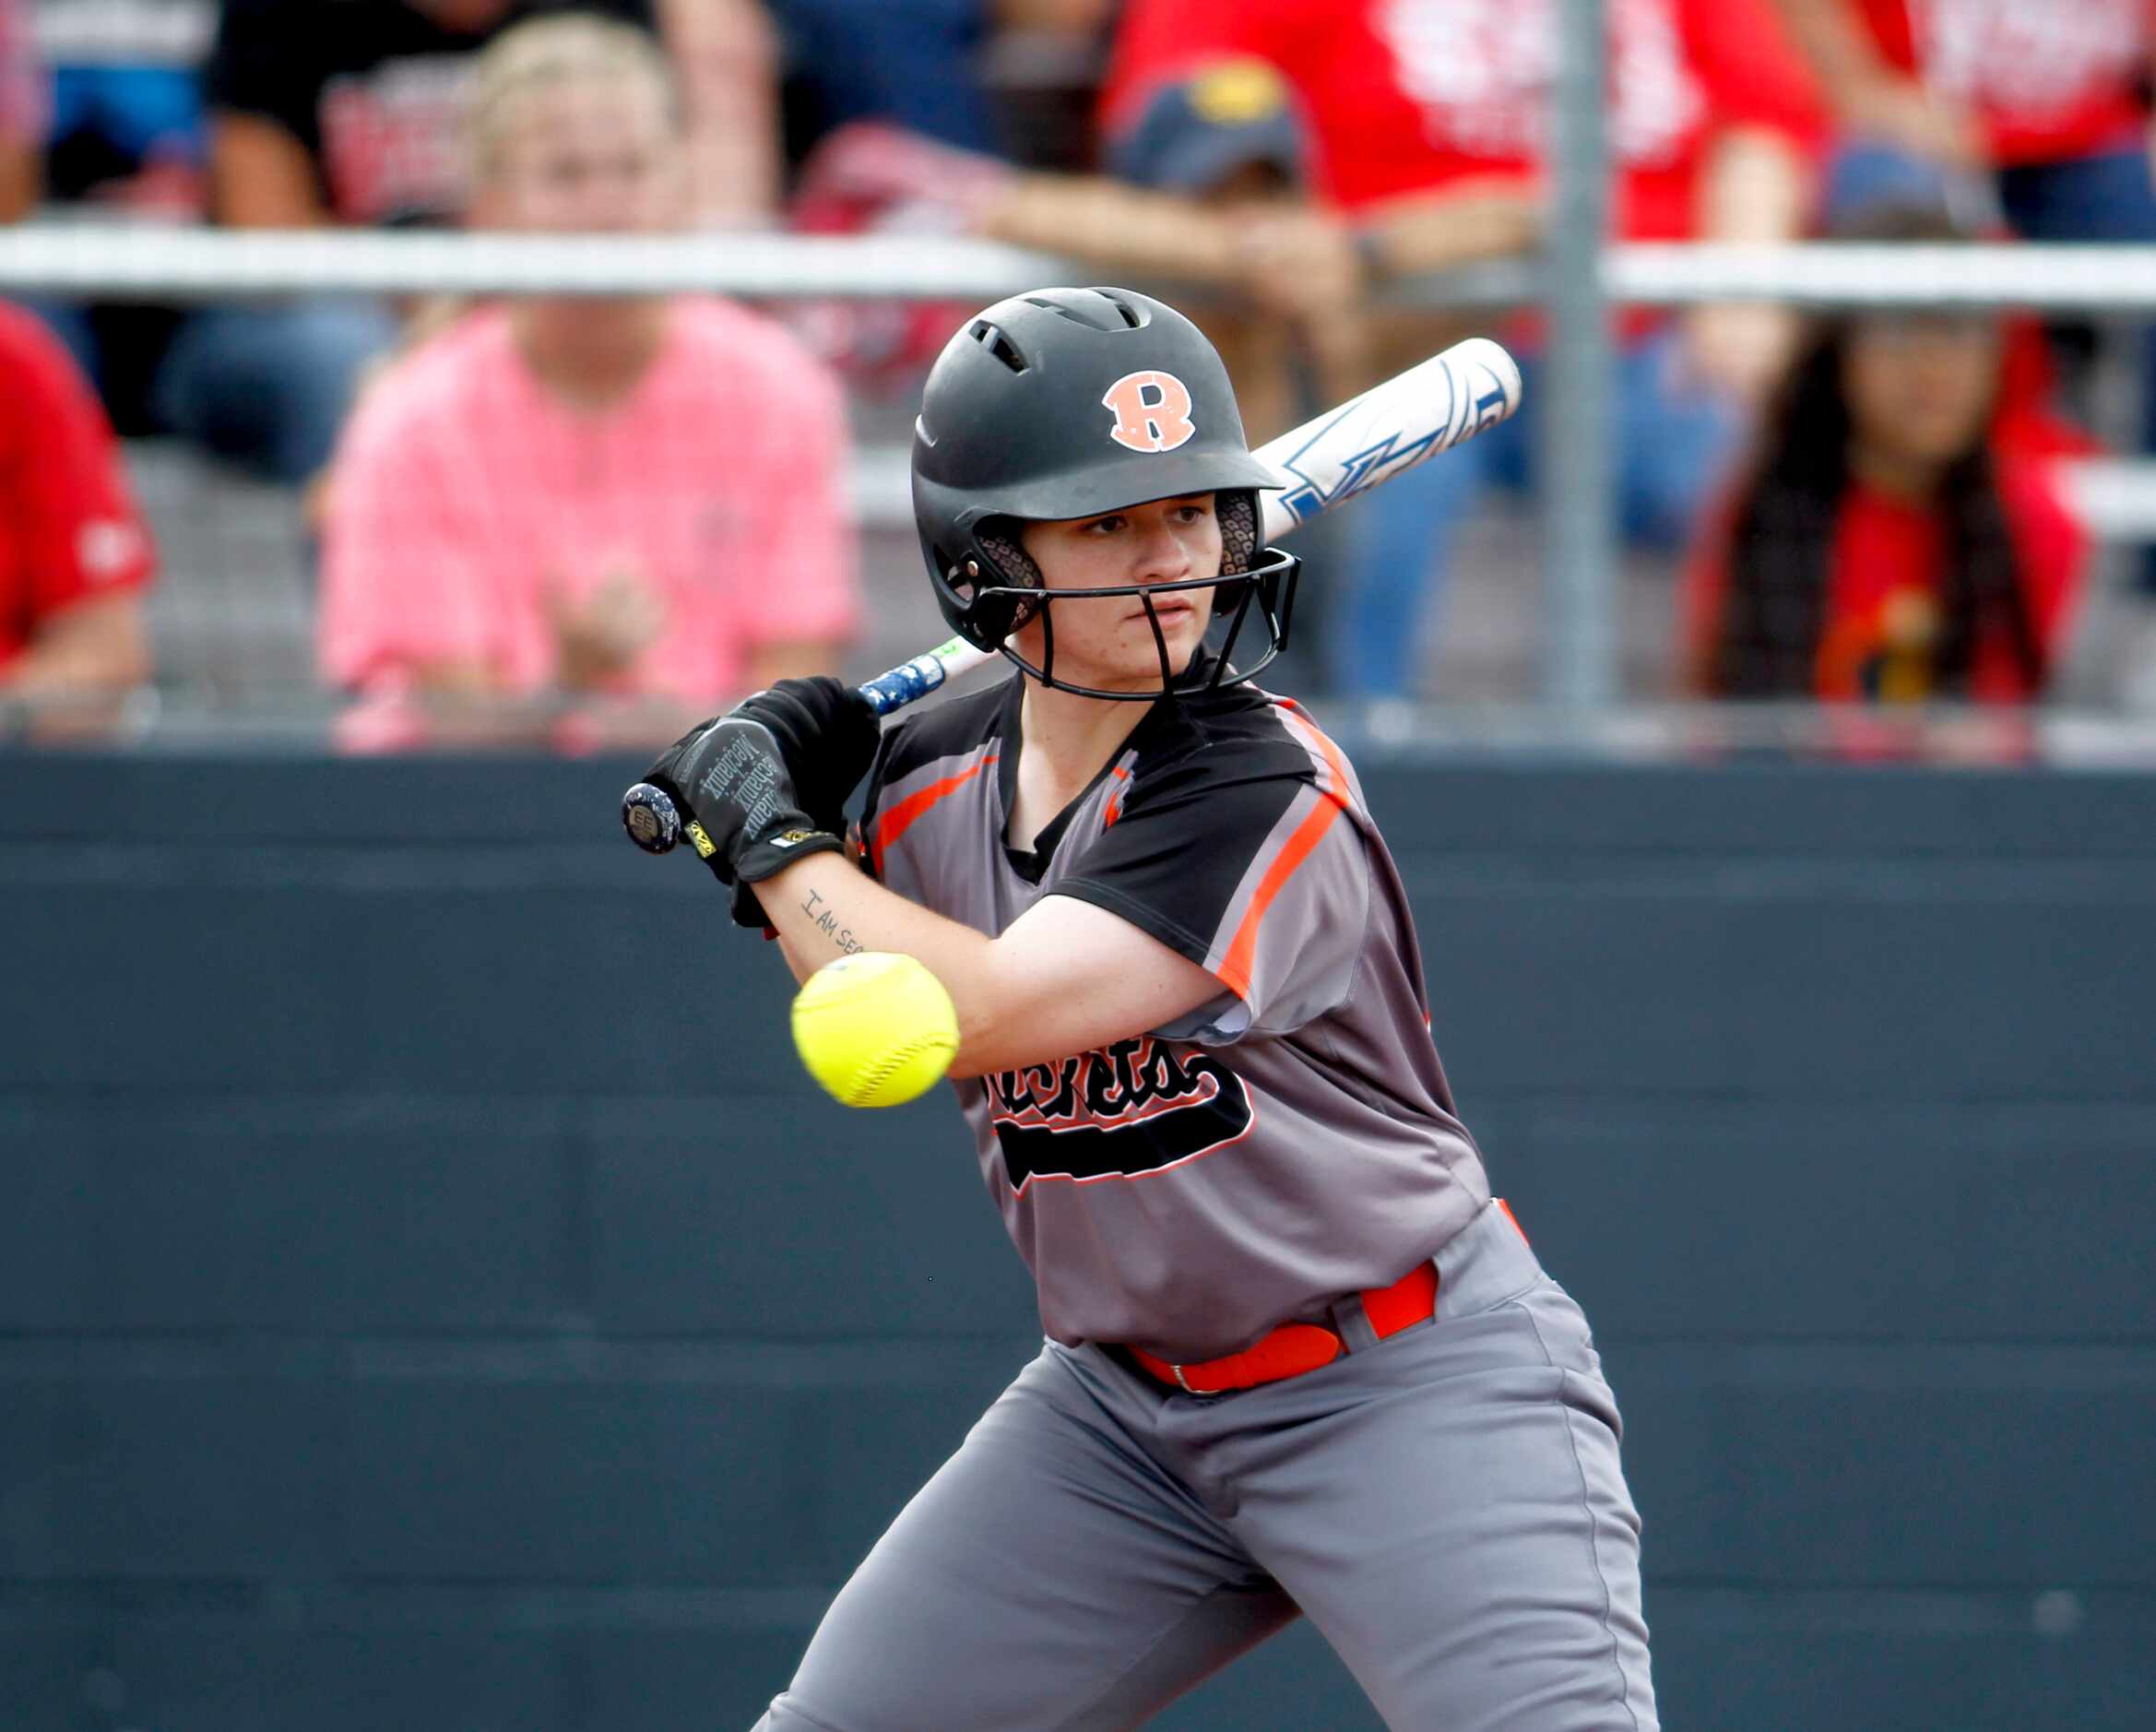 Rockwall's Ashley Monks (00) watches a pitch go by during the top of the 3rd inning against...